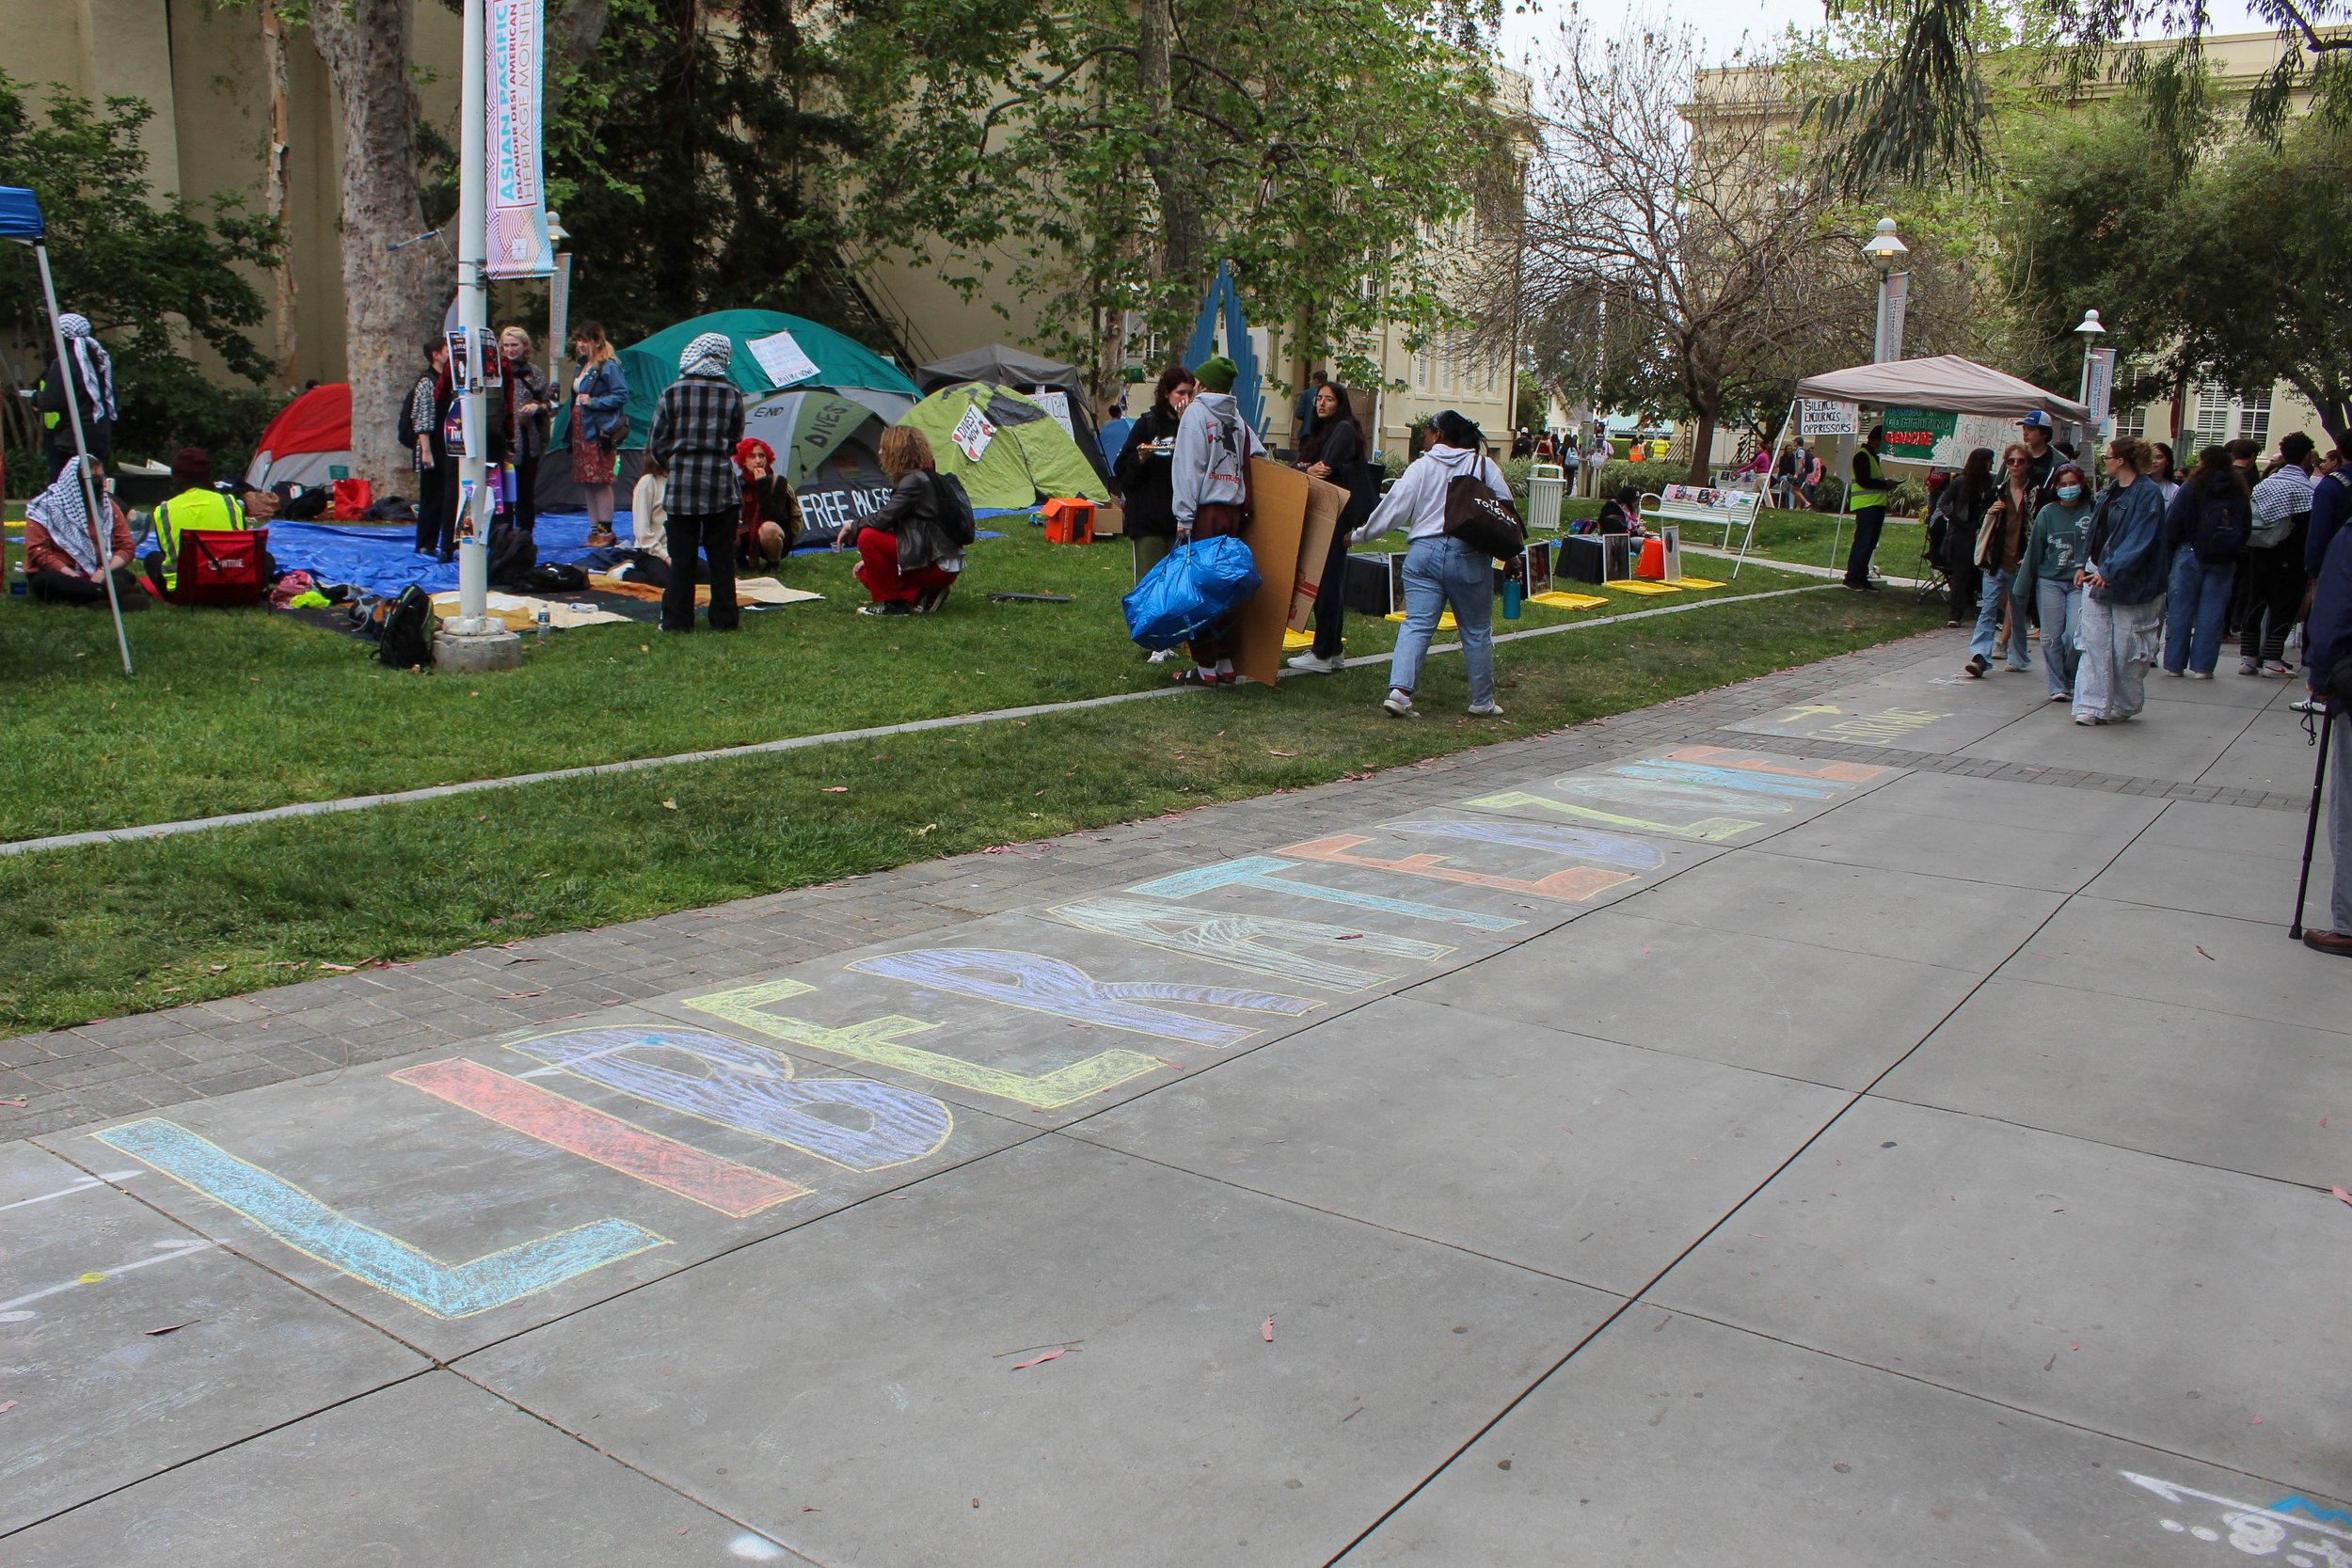    Protestors chalked “Liberated Zone”  in front of the encampment. Photo by RENEE ELEFANTE, Editor-in-Chief   